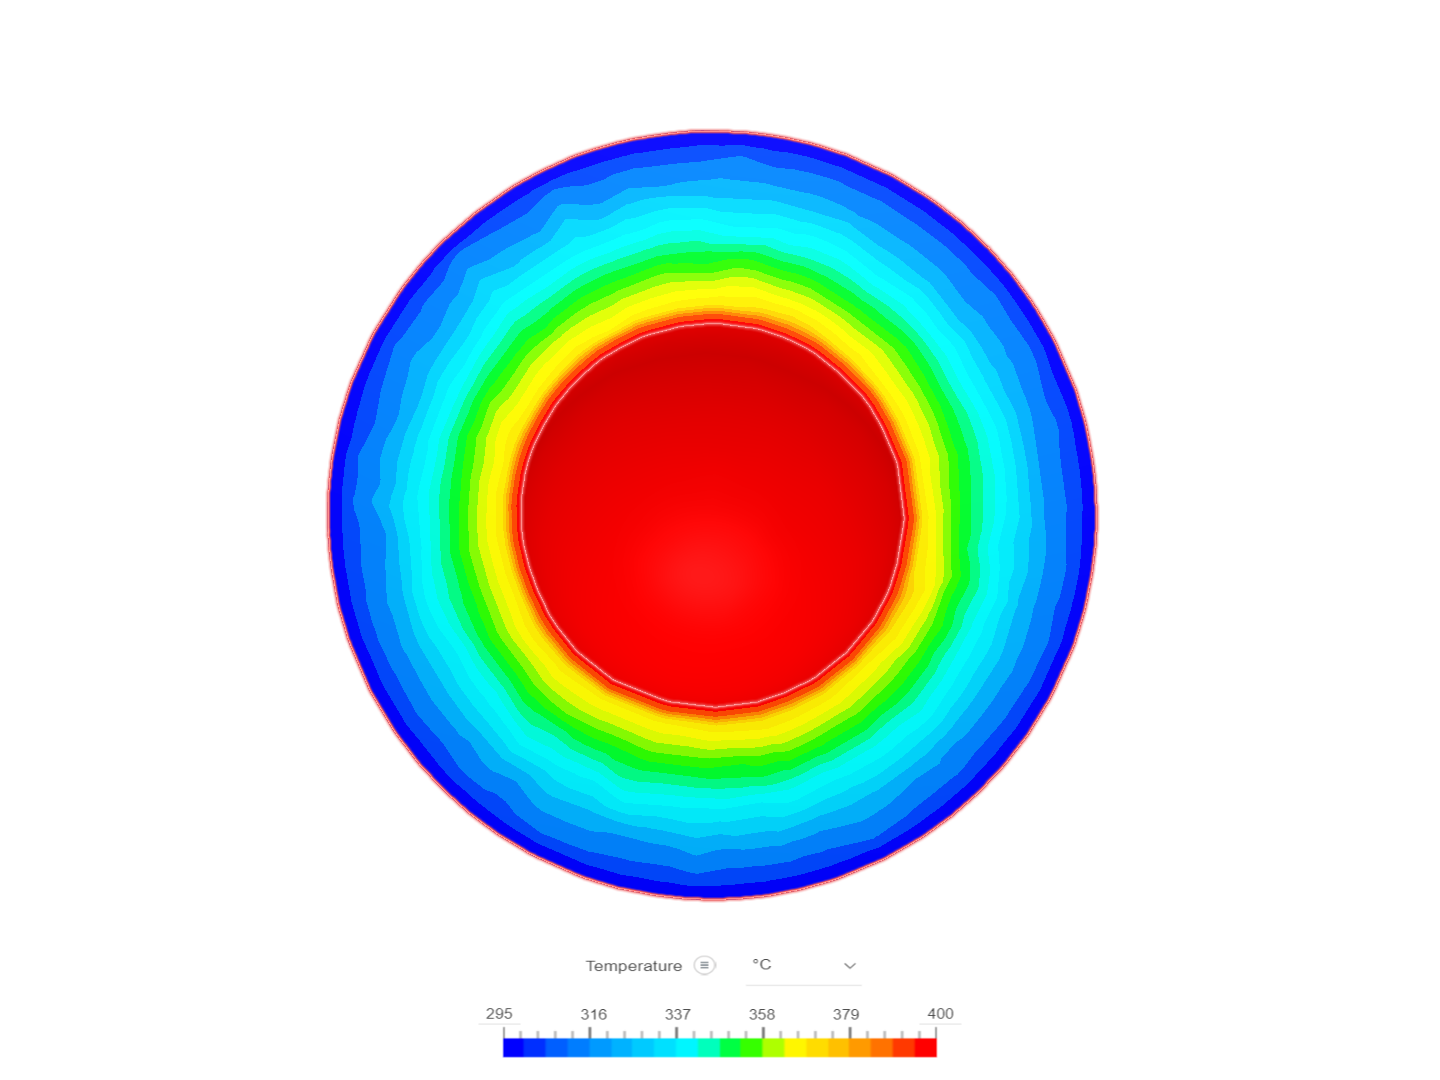 validation_of_the_thermal_radiation_heat_transfer_of_concentric_spheres image